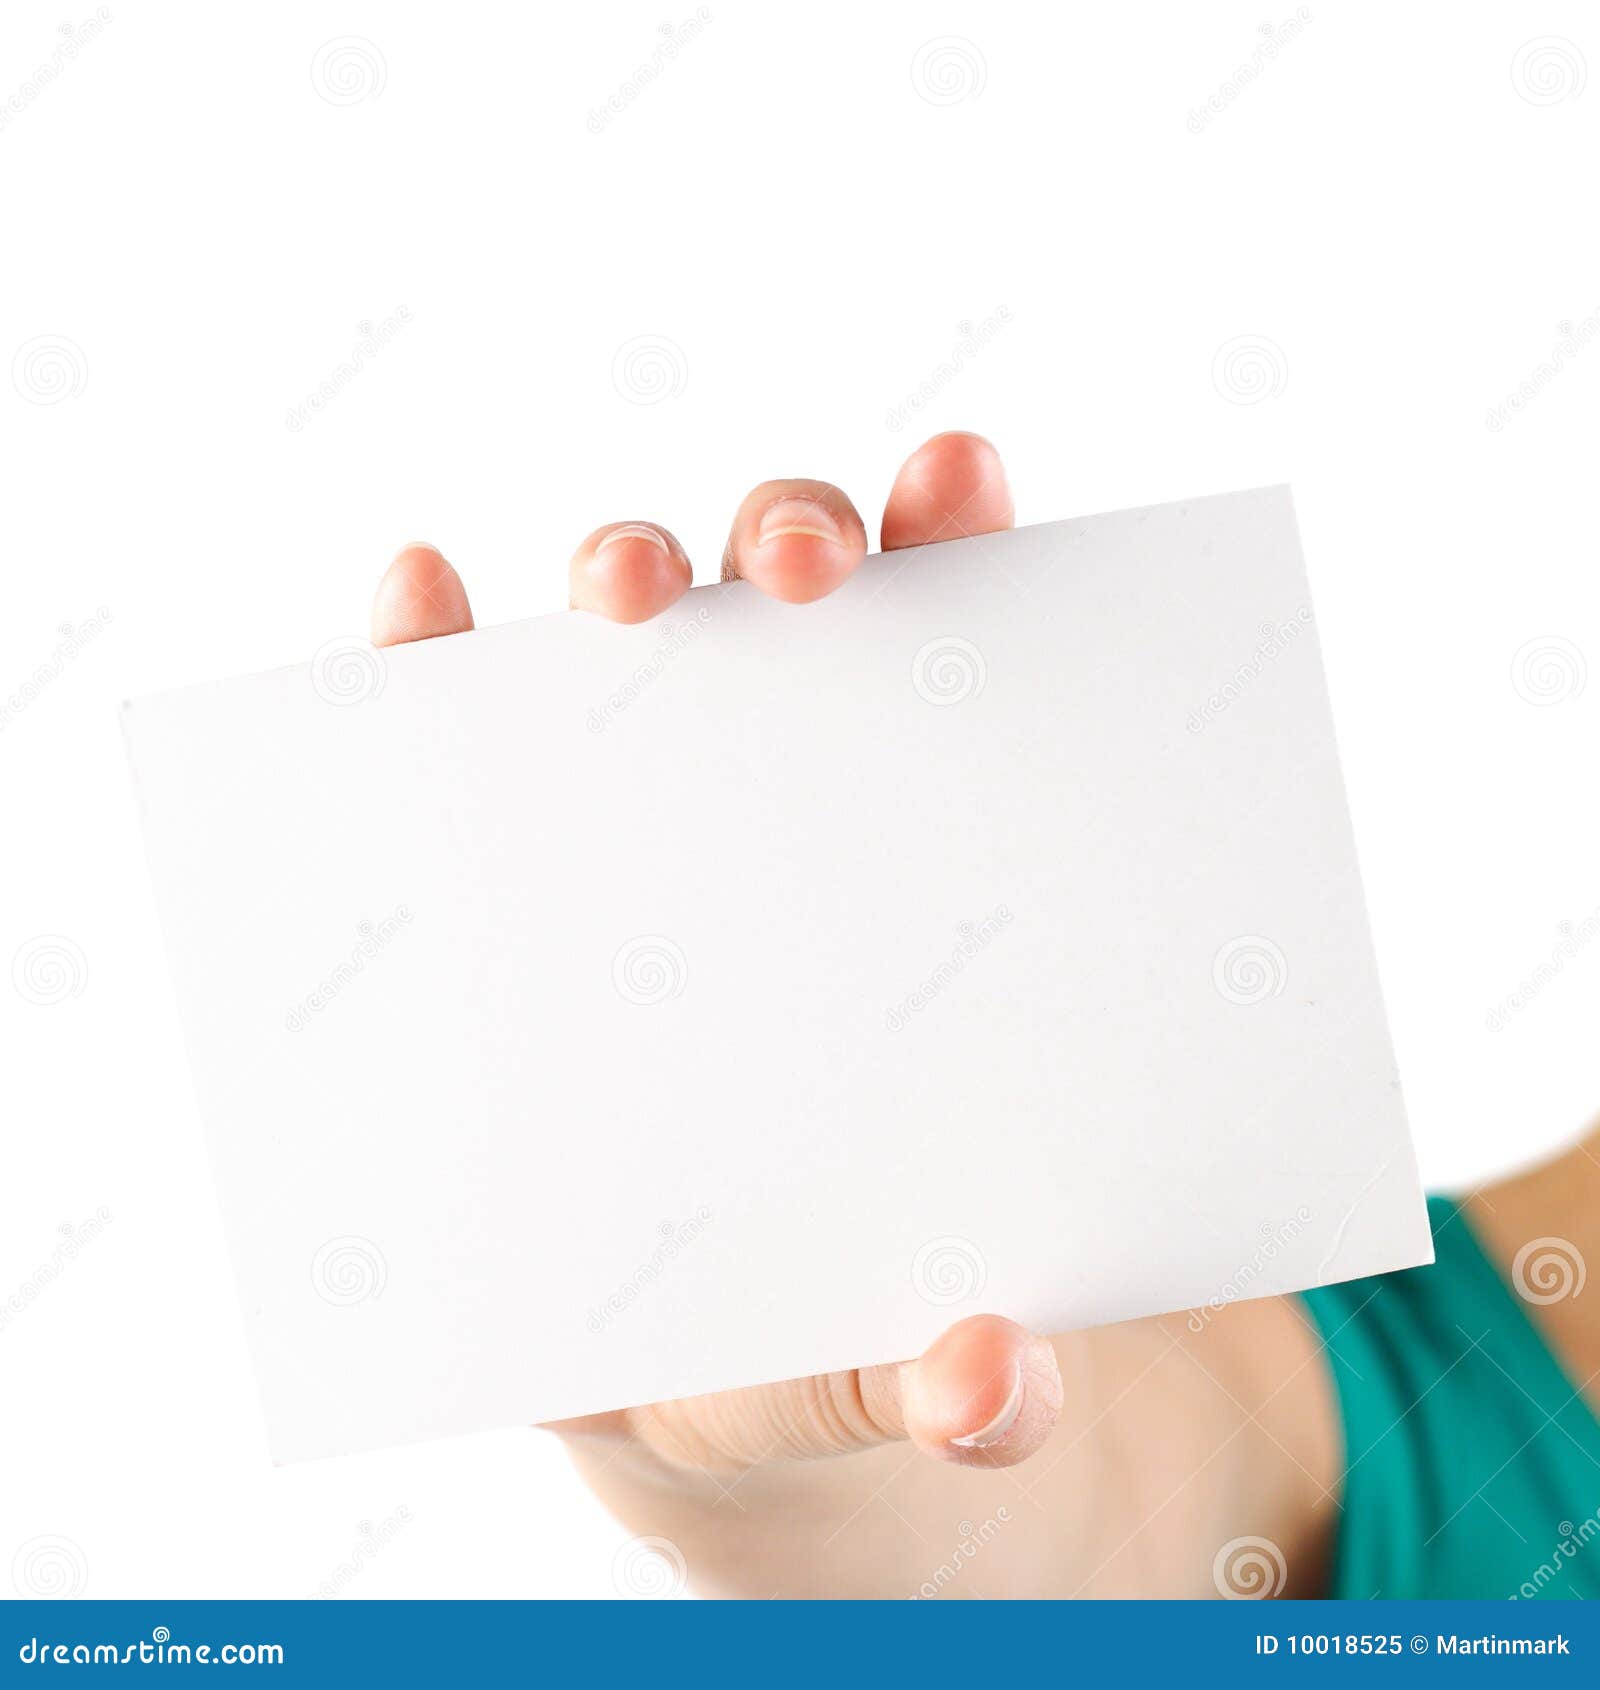 More similar stock images of ` Blank note card `